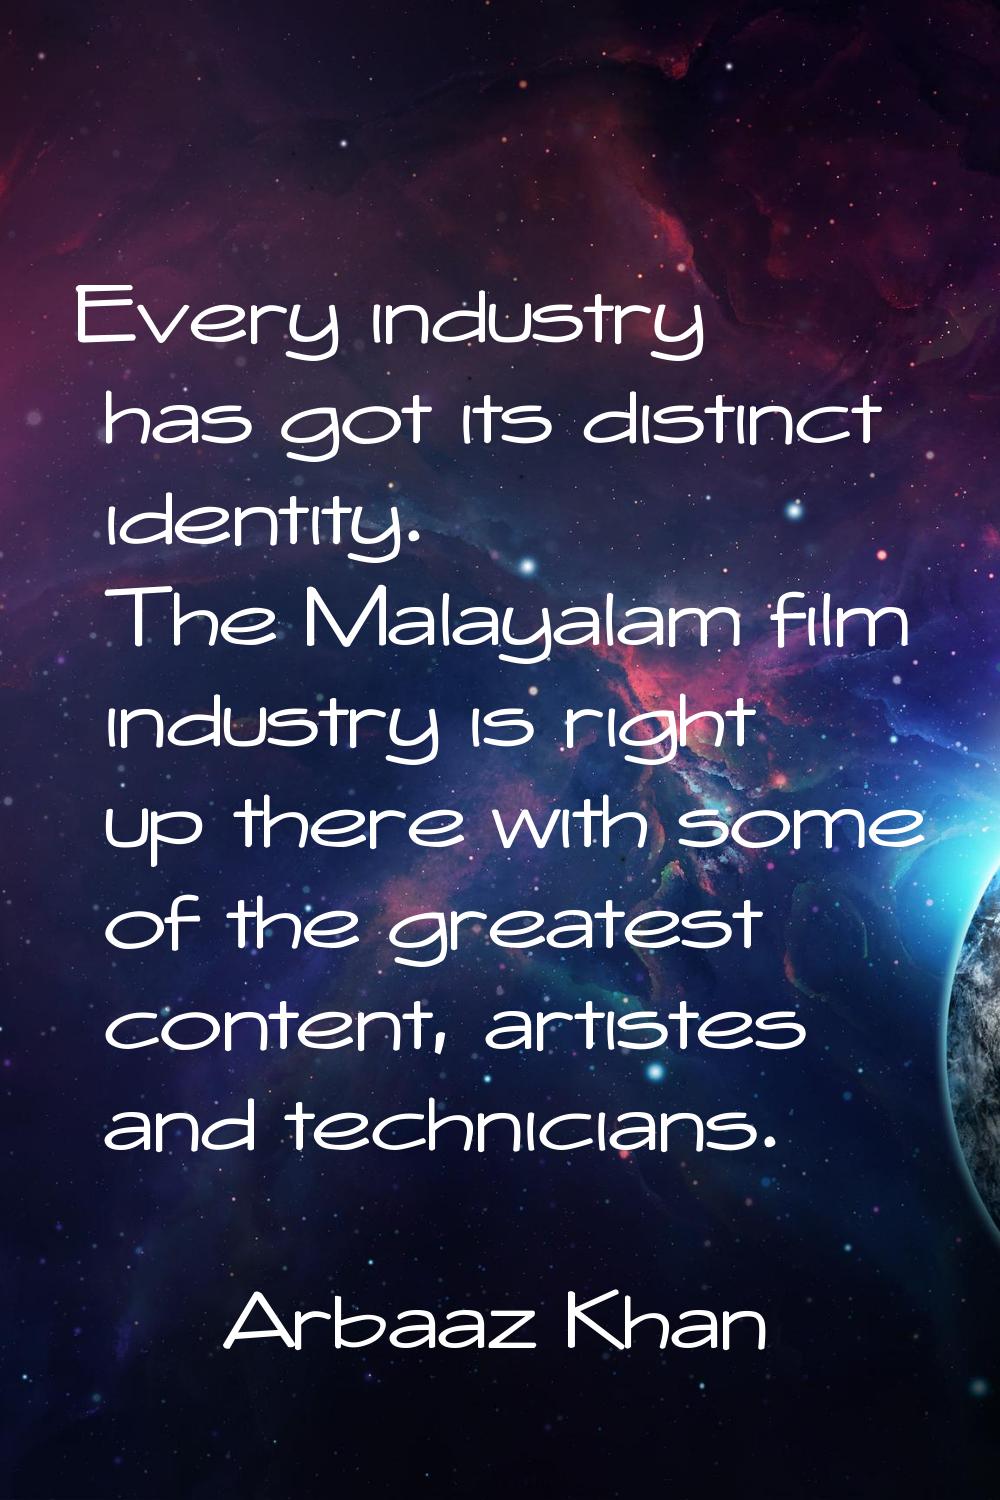 Every industry has got its distinct identity. The Malayalam film industry is right up there with so